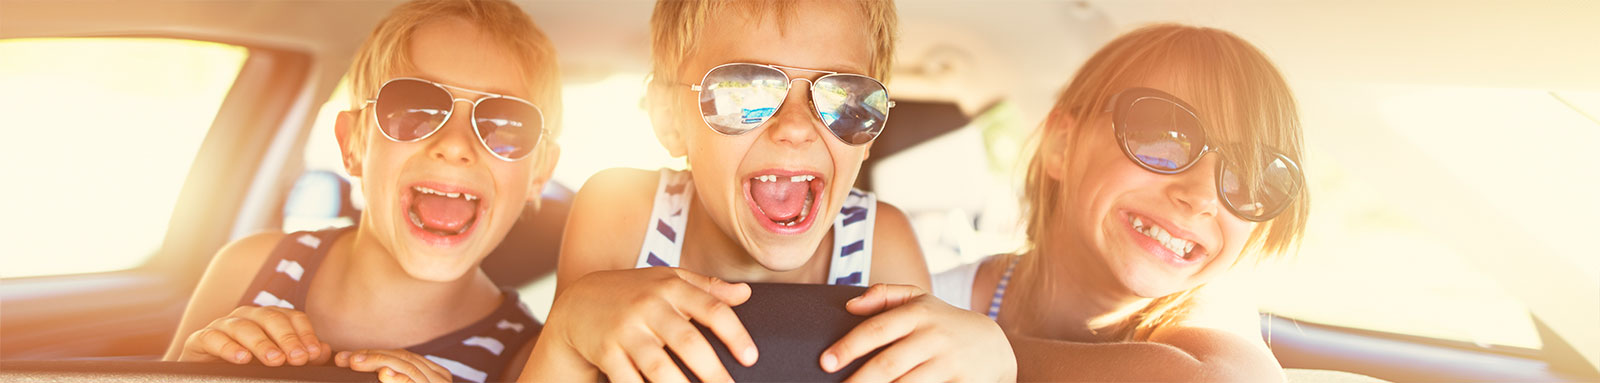 Kids in the backseat of car with sunglasses smiling